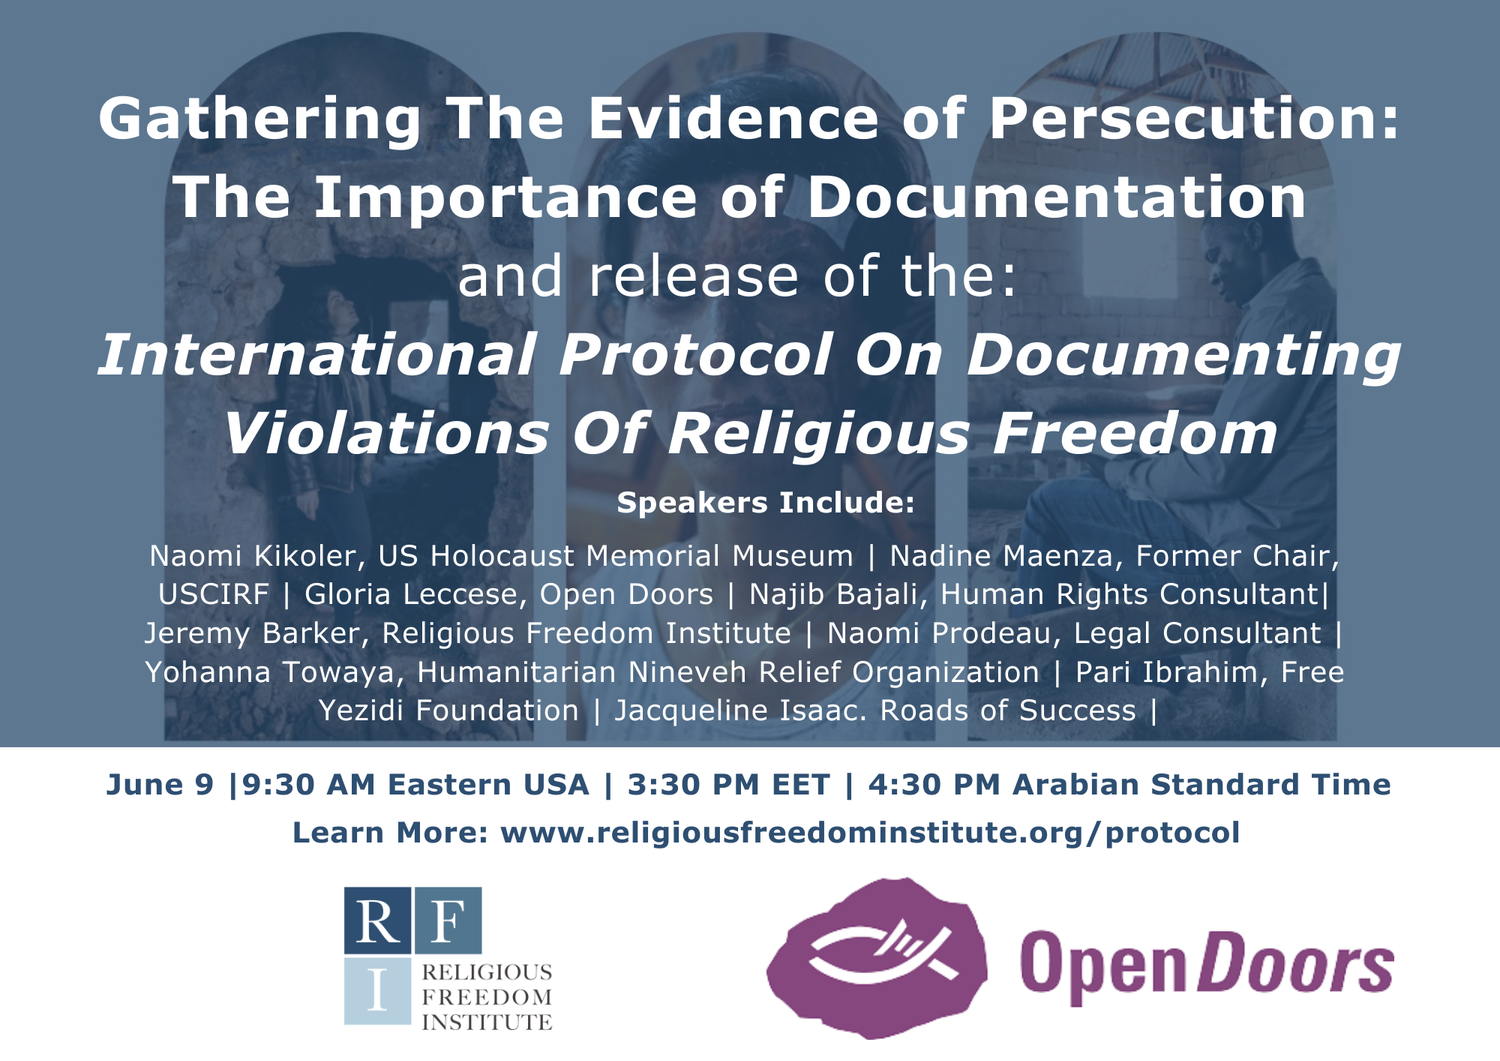 Featured image for “Gathering The Evidence of Persecution: The Importance of Documentation and Launch of the “International Protocol On Documenting Violations Of Religious Freedom””